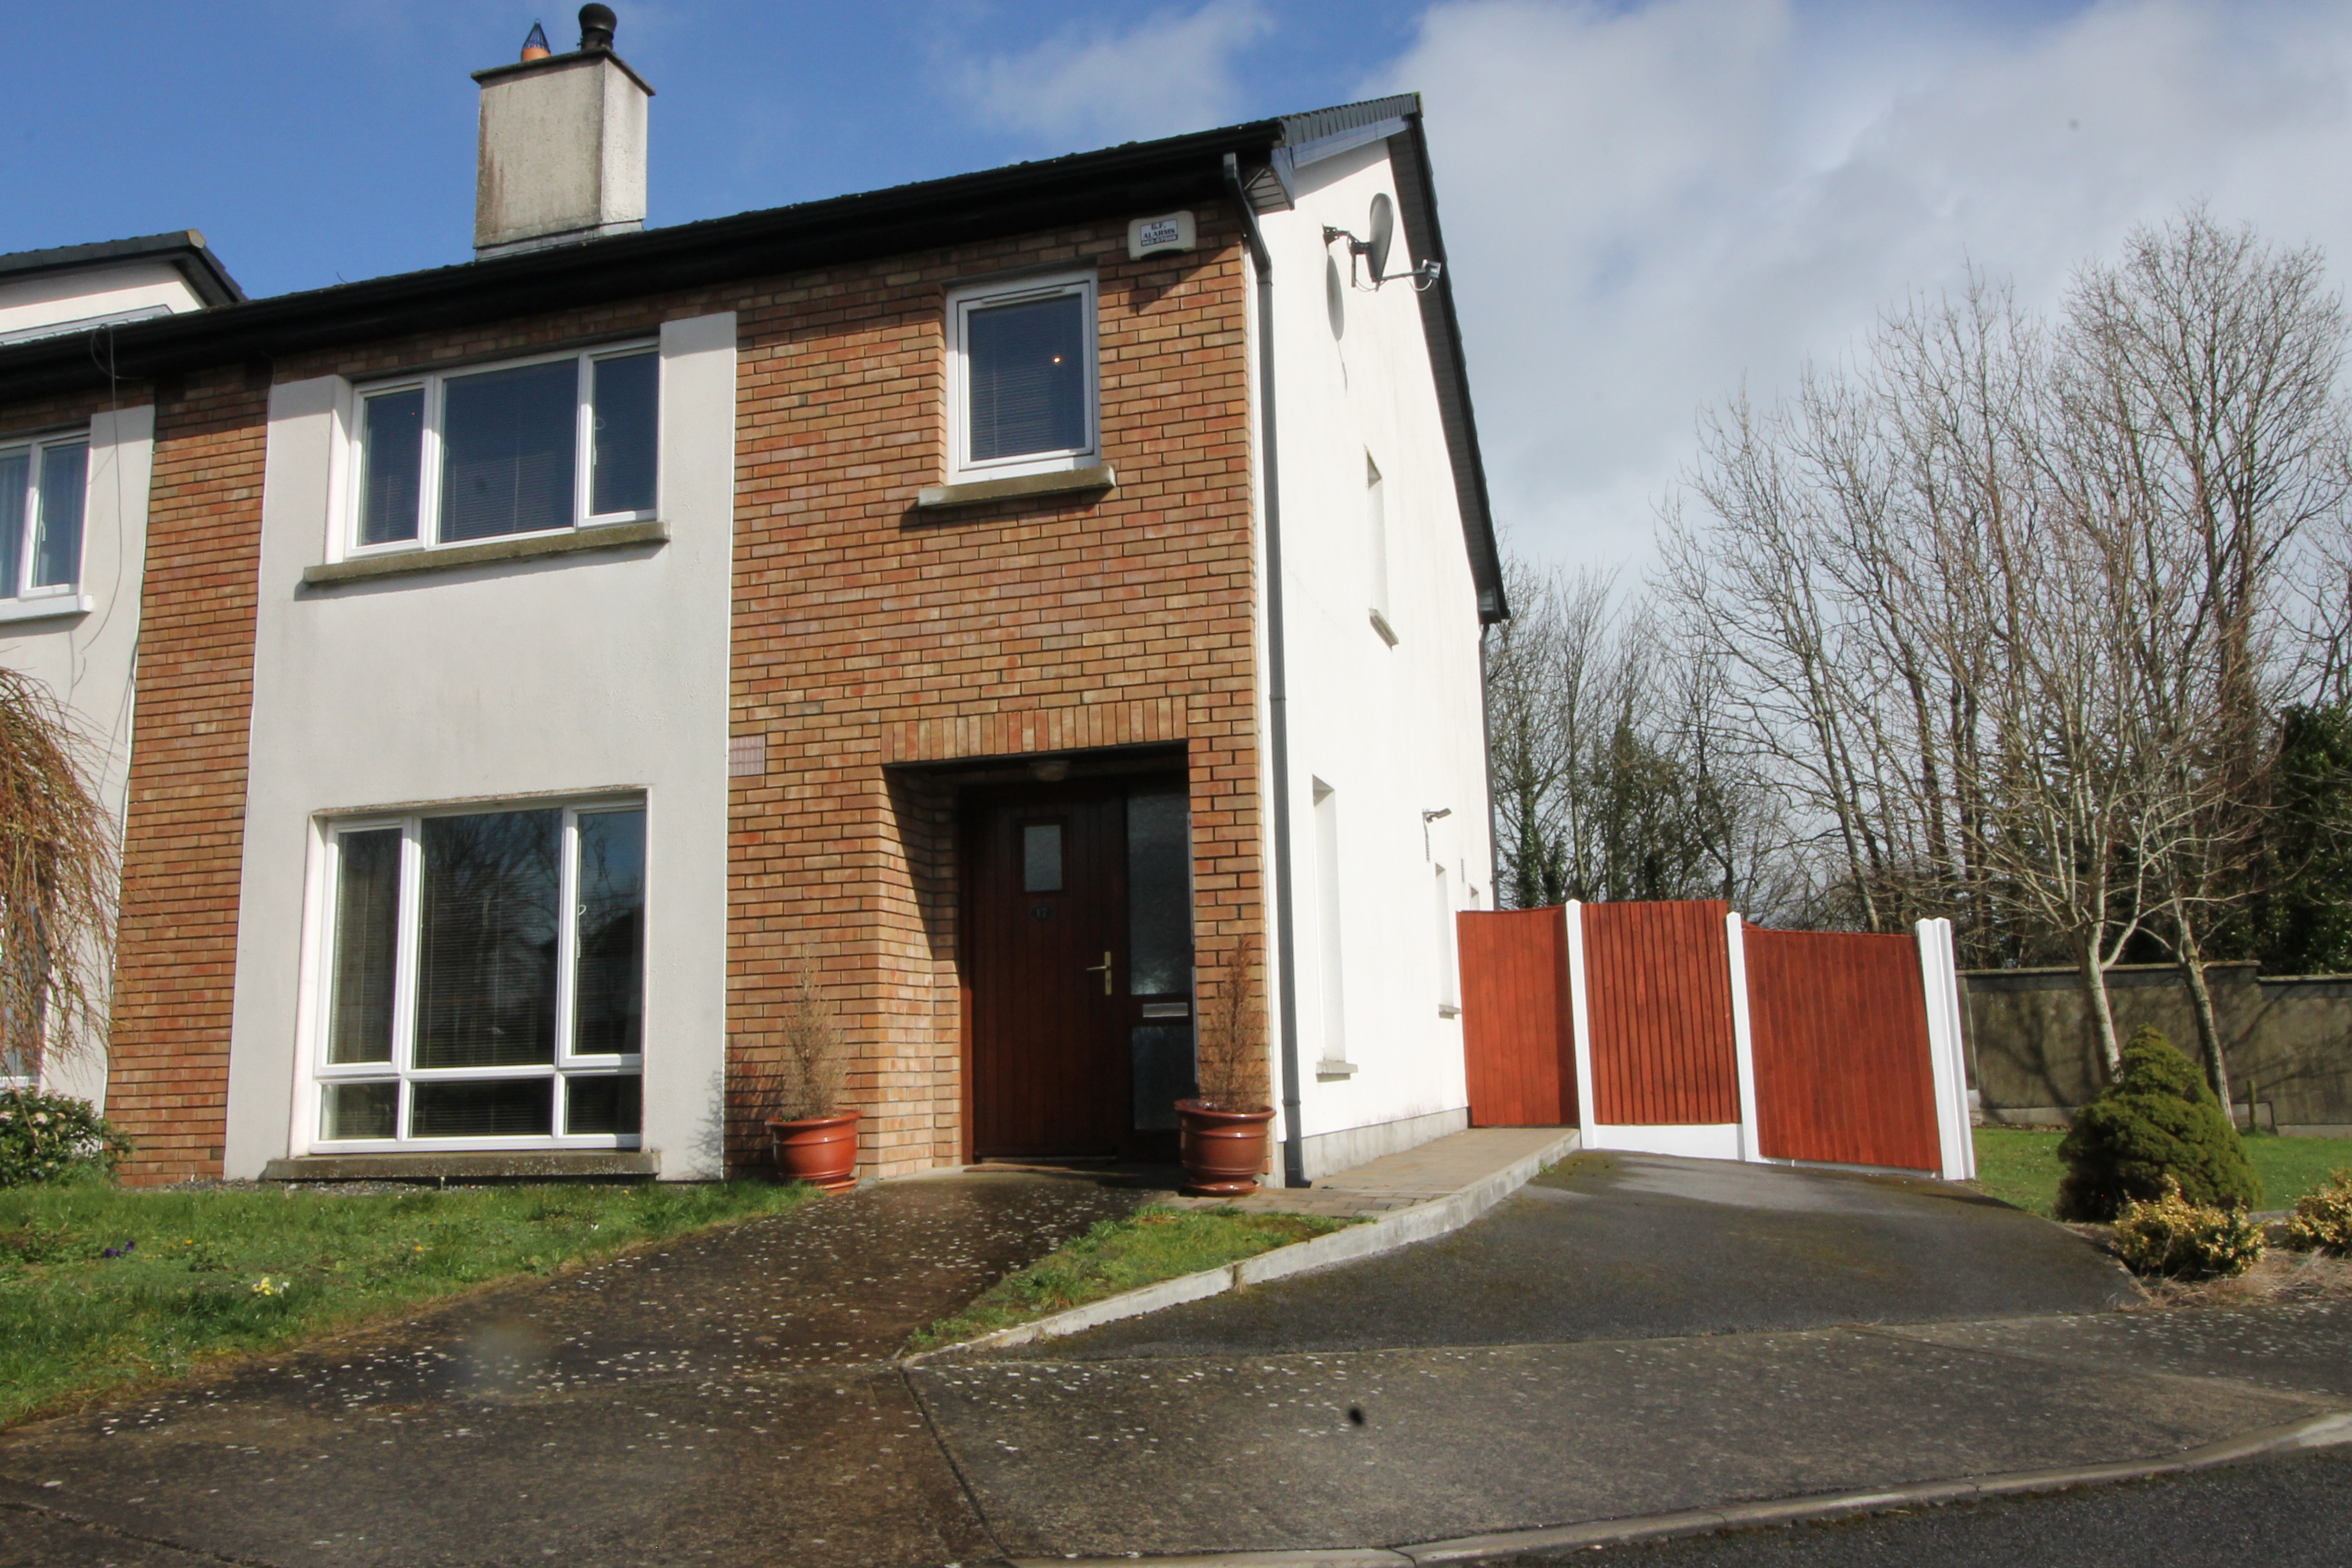 17 Arravale Close, Galbally Road, Tipperary Town, Co. Tipperary